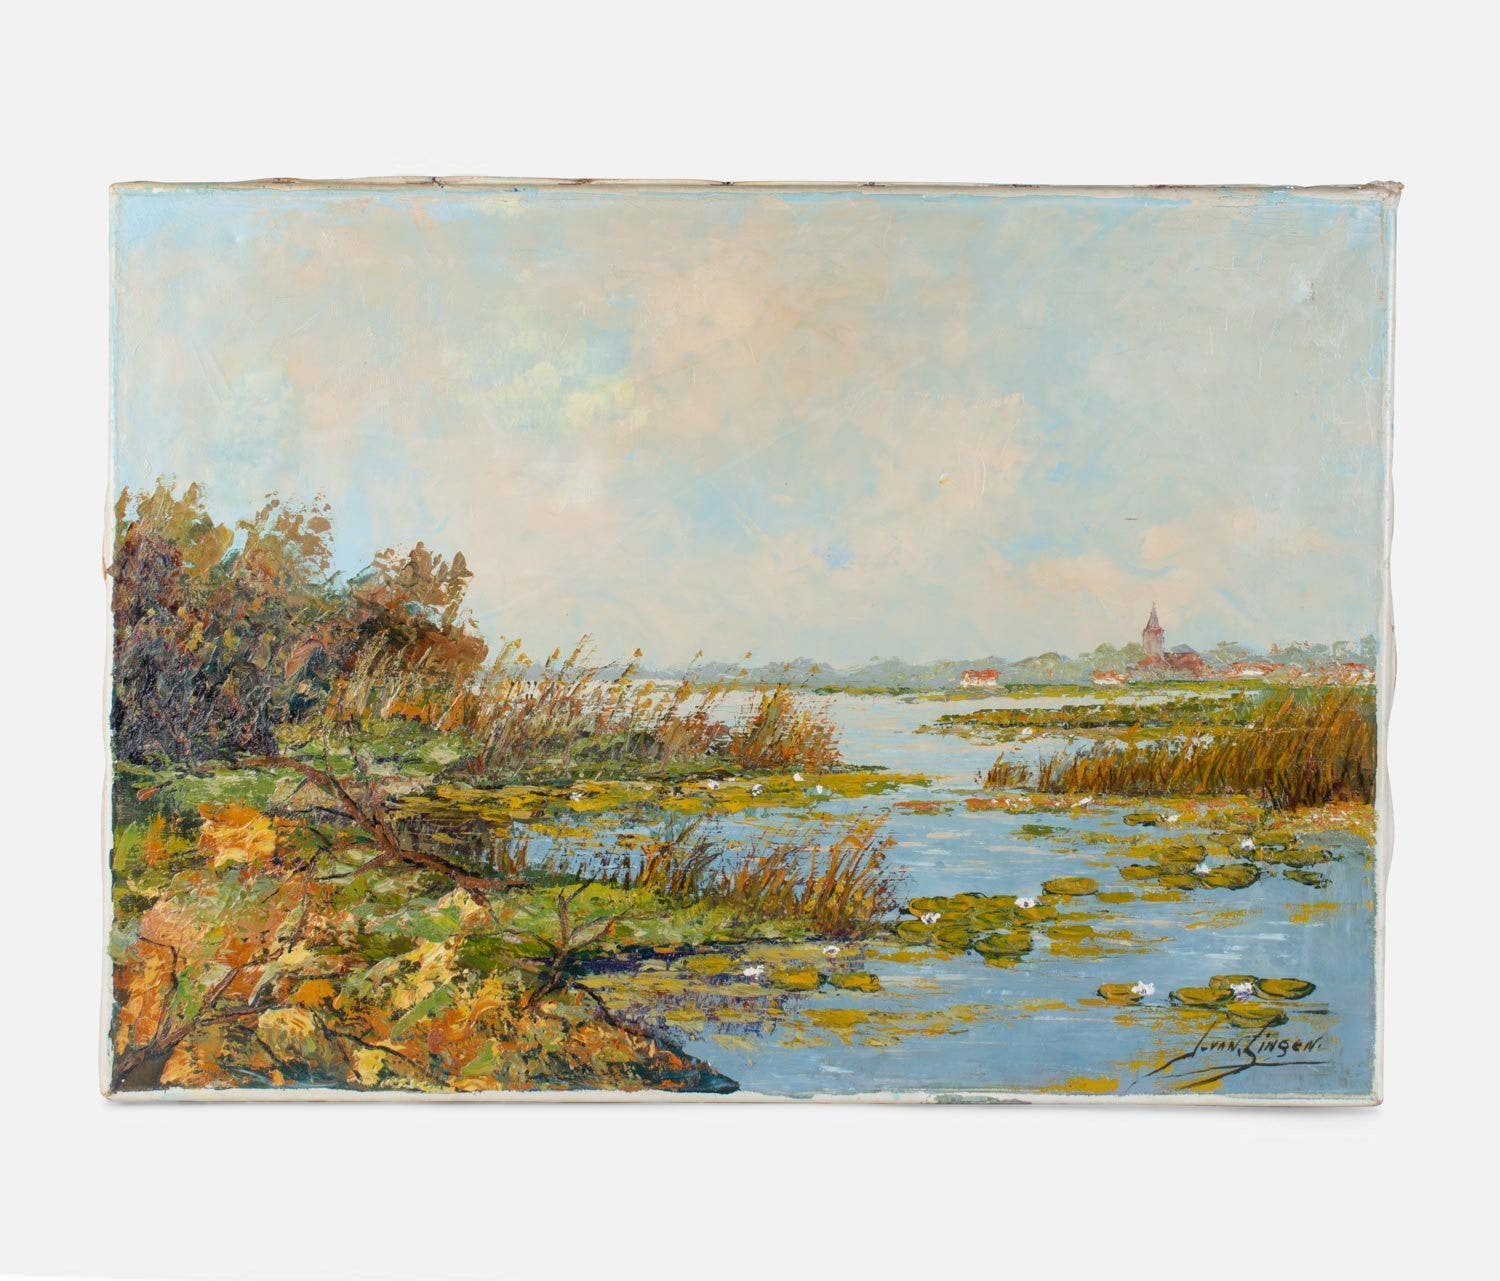 Tress On Riverbed - Landscape Painting On Canvas Multi